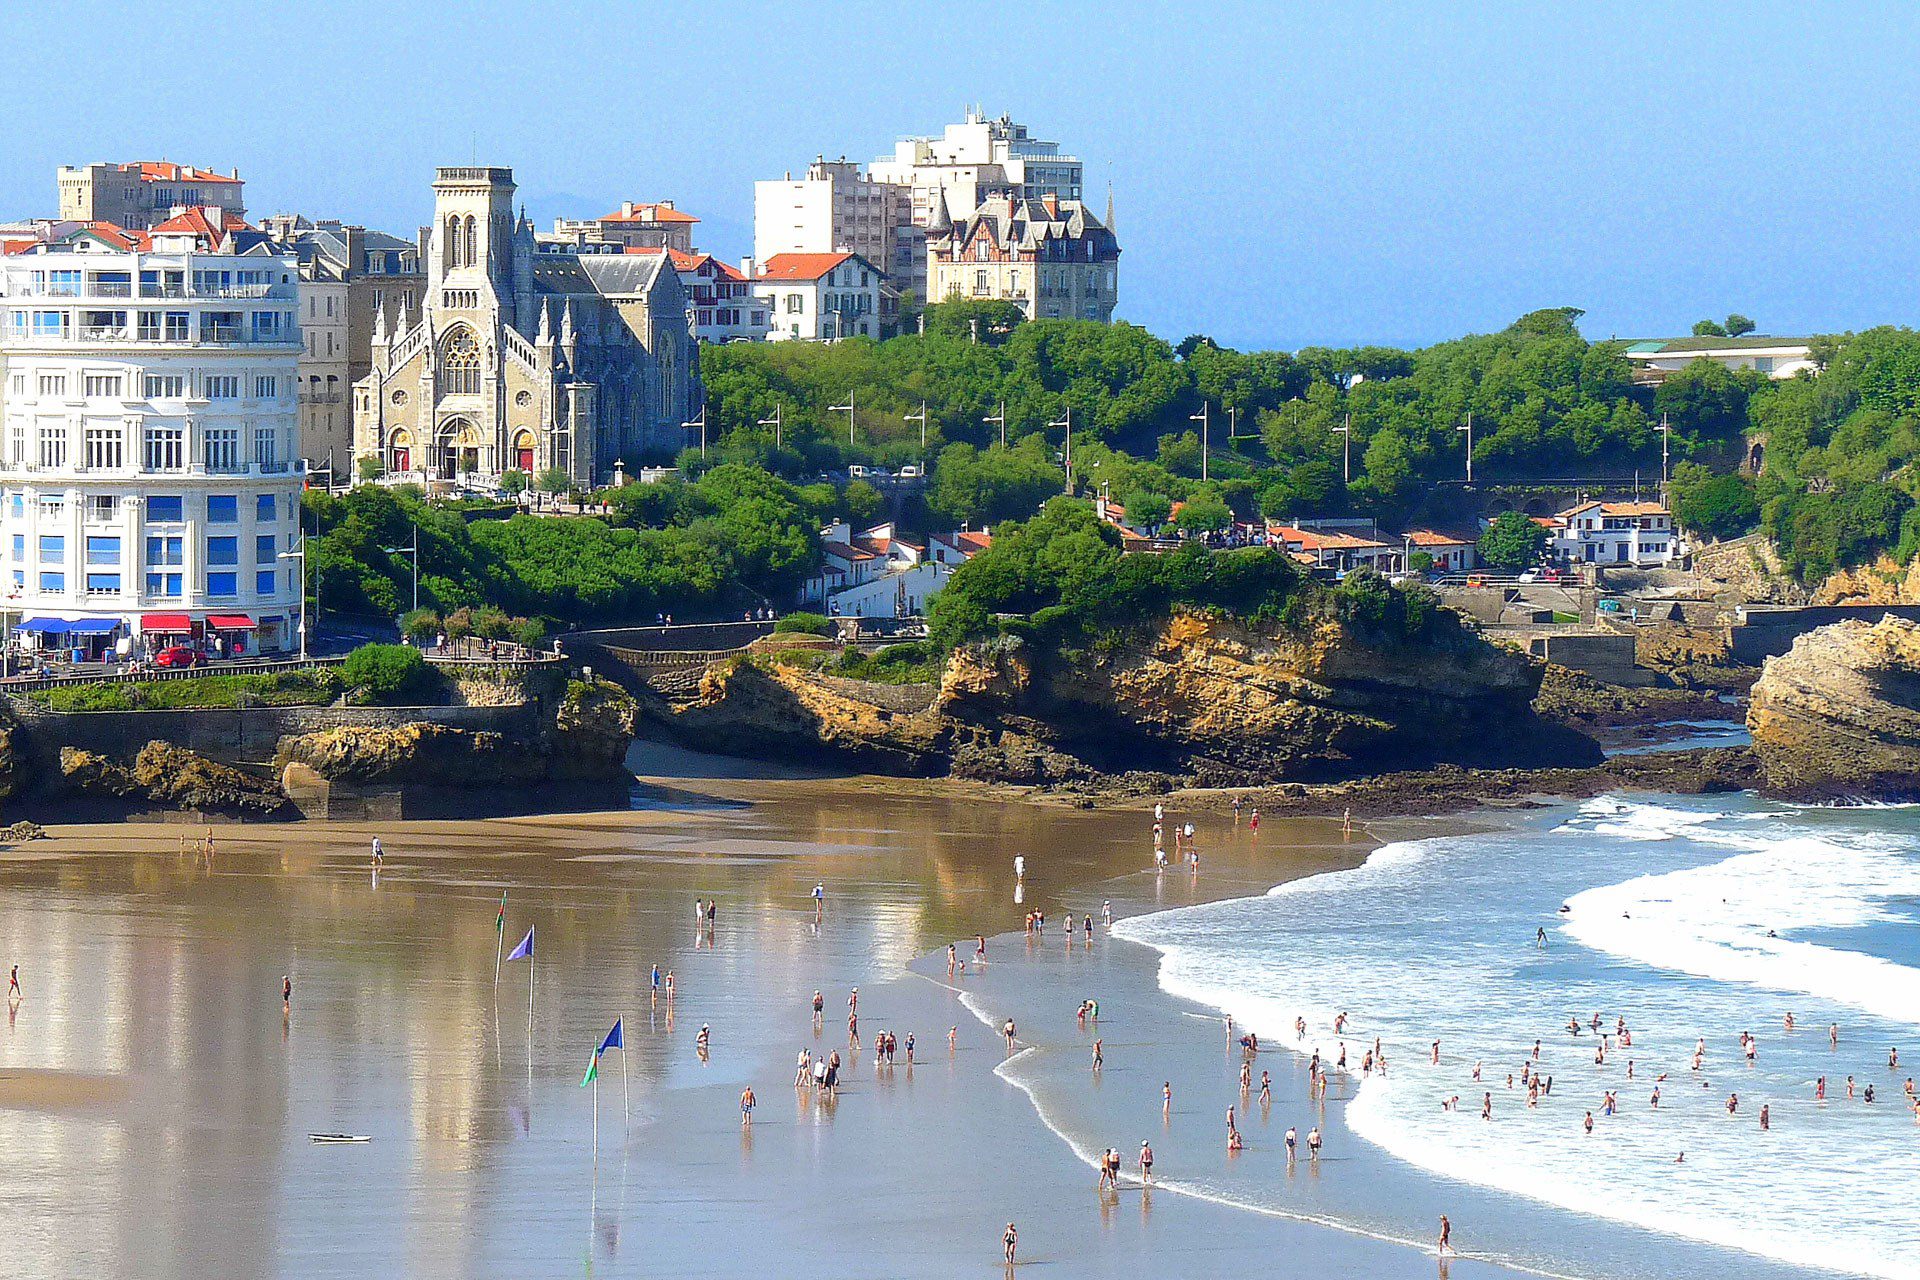 źródło: http://www.cntraveller.com/recommended/coast-countryside/biarritz-france-weekend